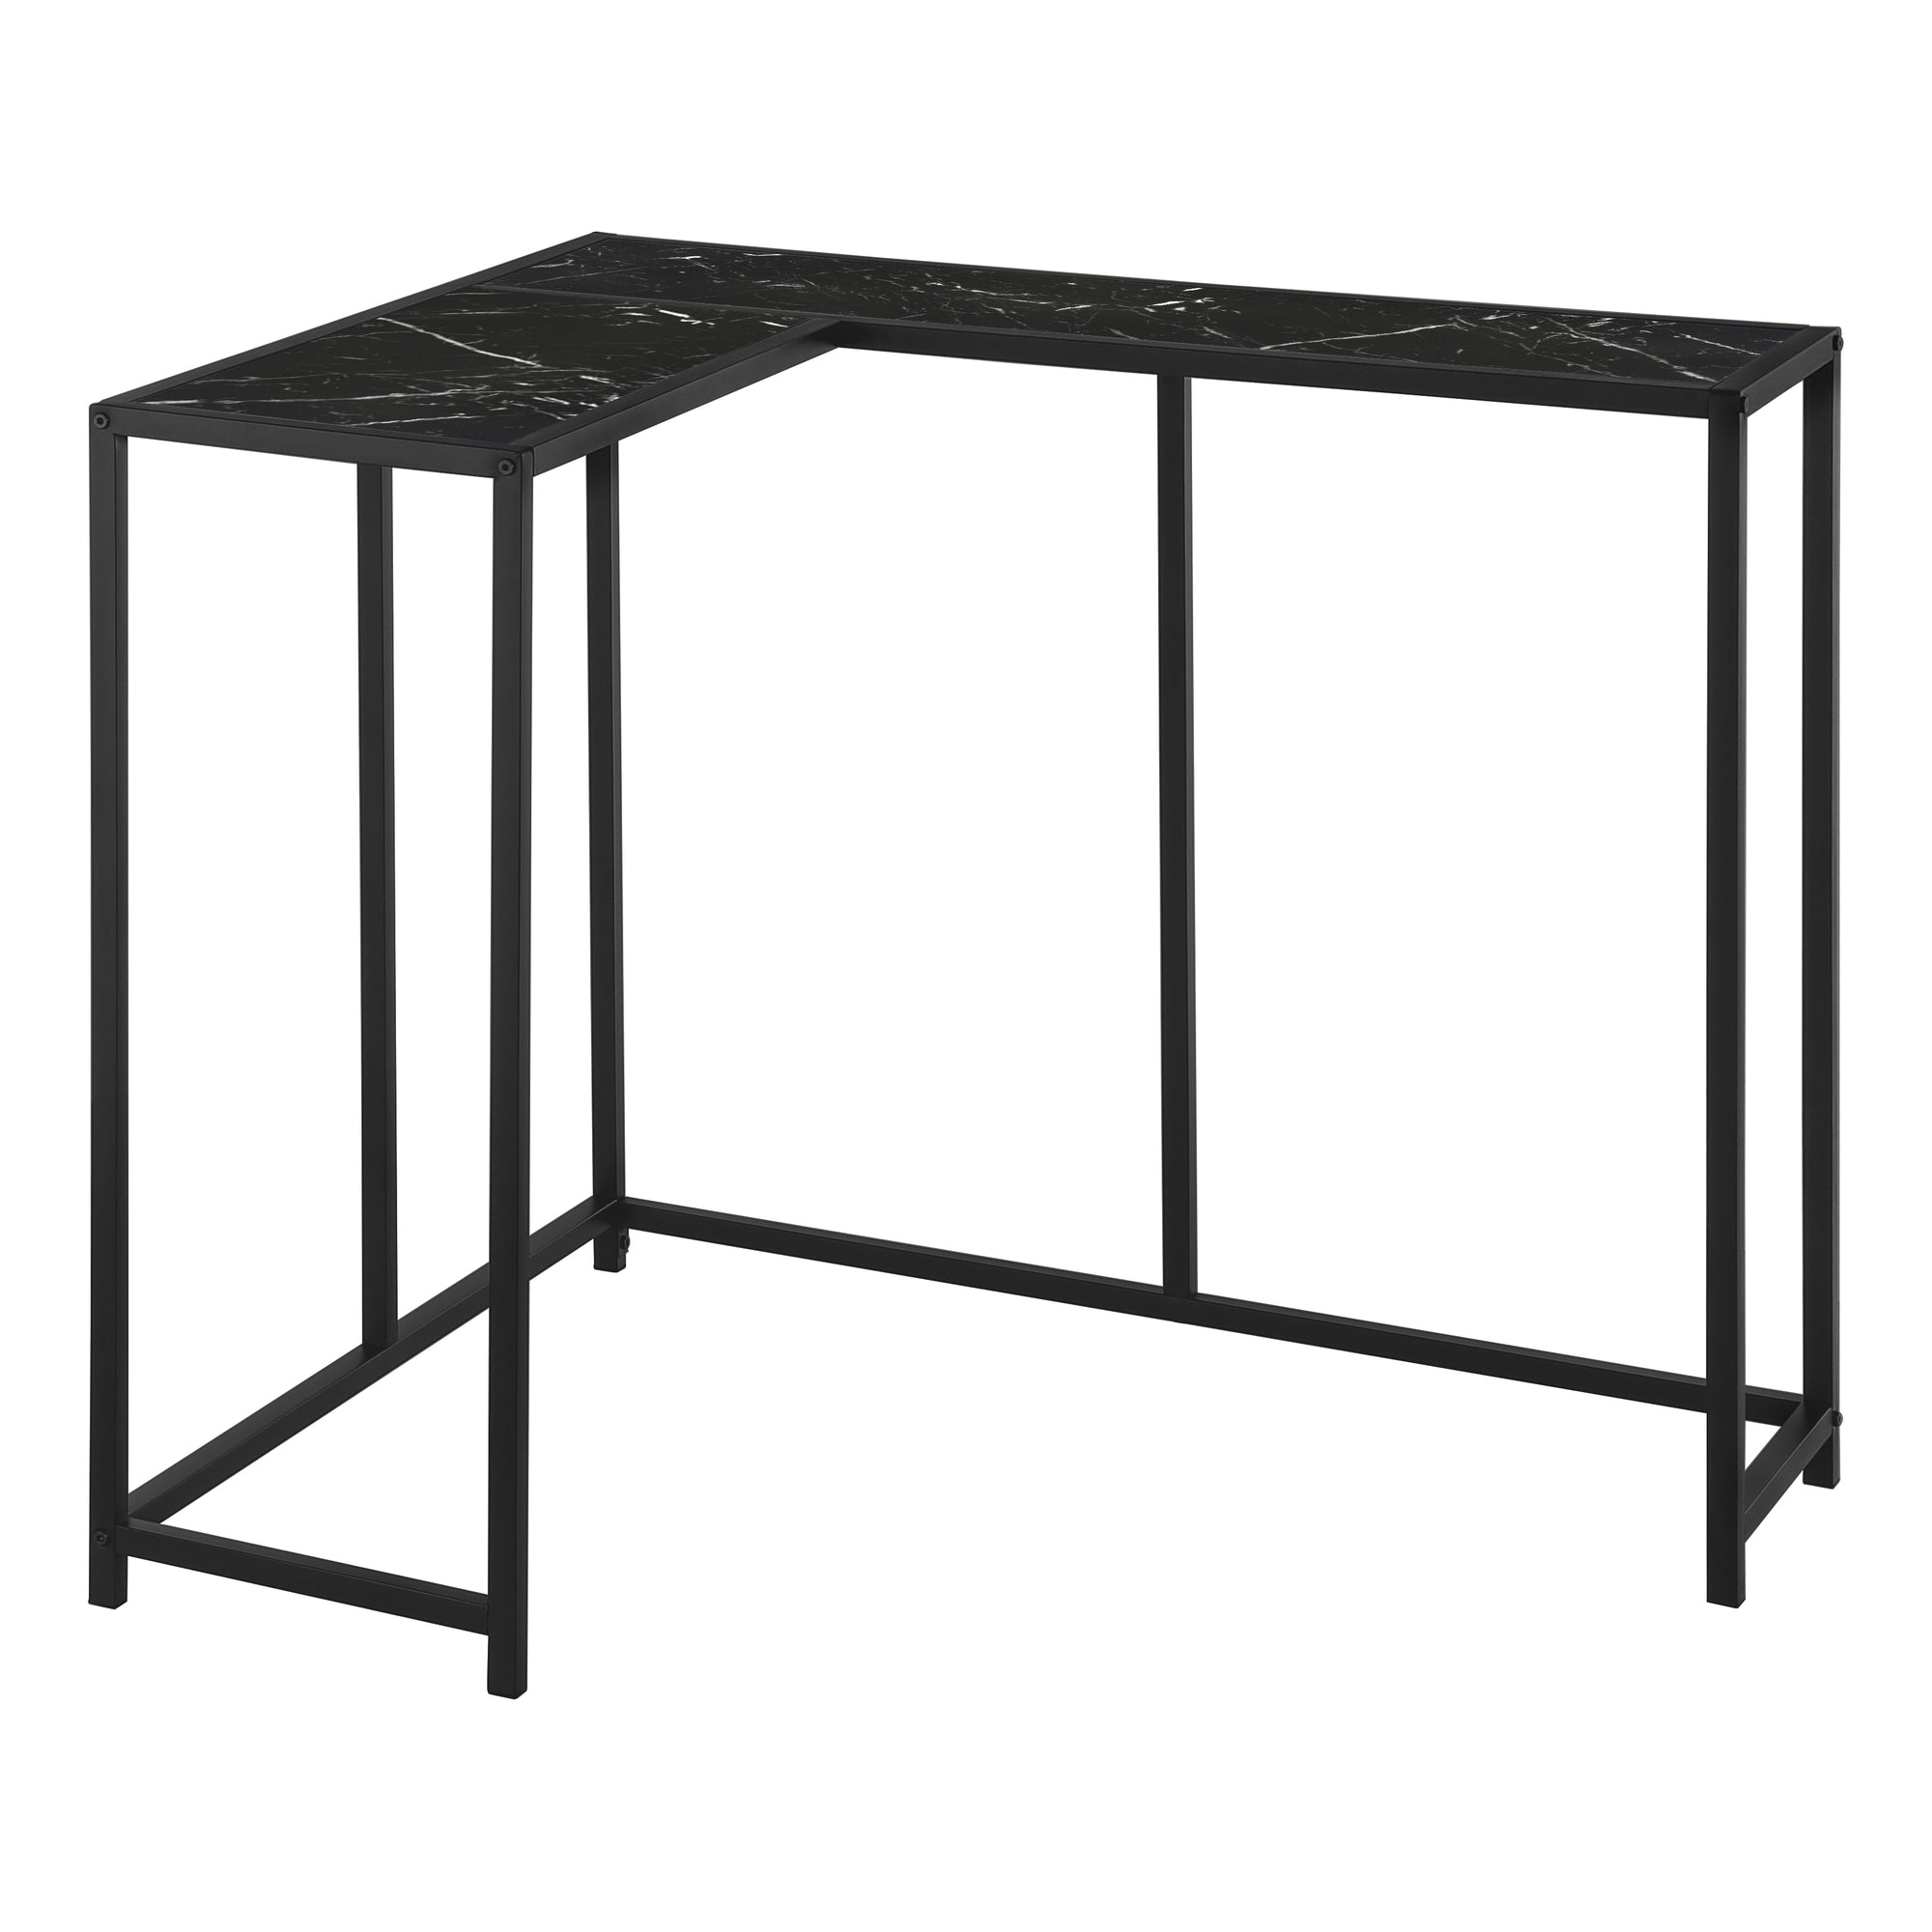 MN-312158    Accent Table, Console, Entryway, Narrow, Corner, Living Room, Bedroom, Metal Frame, Laminate, Black Marble-Look, Black, Contemporary, Modern